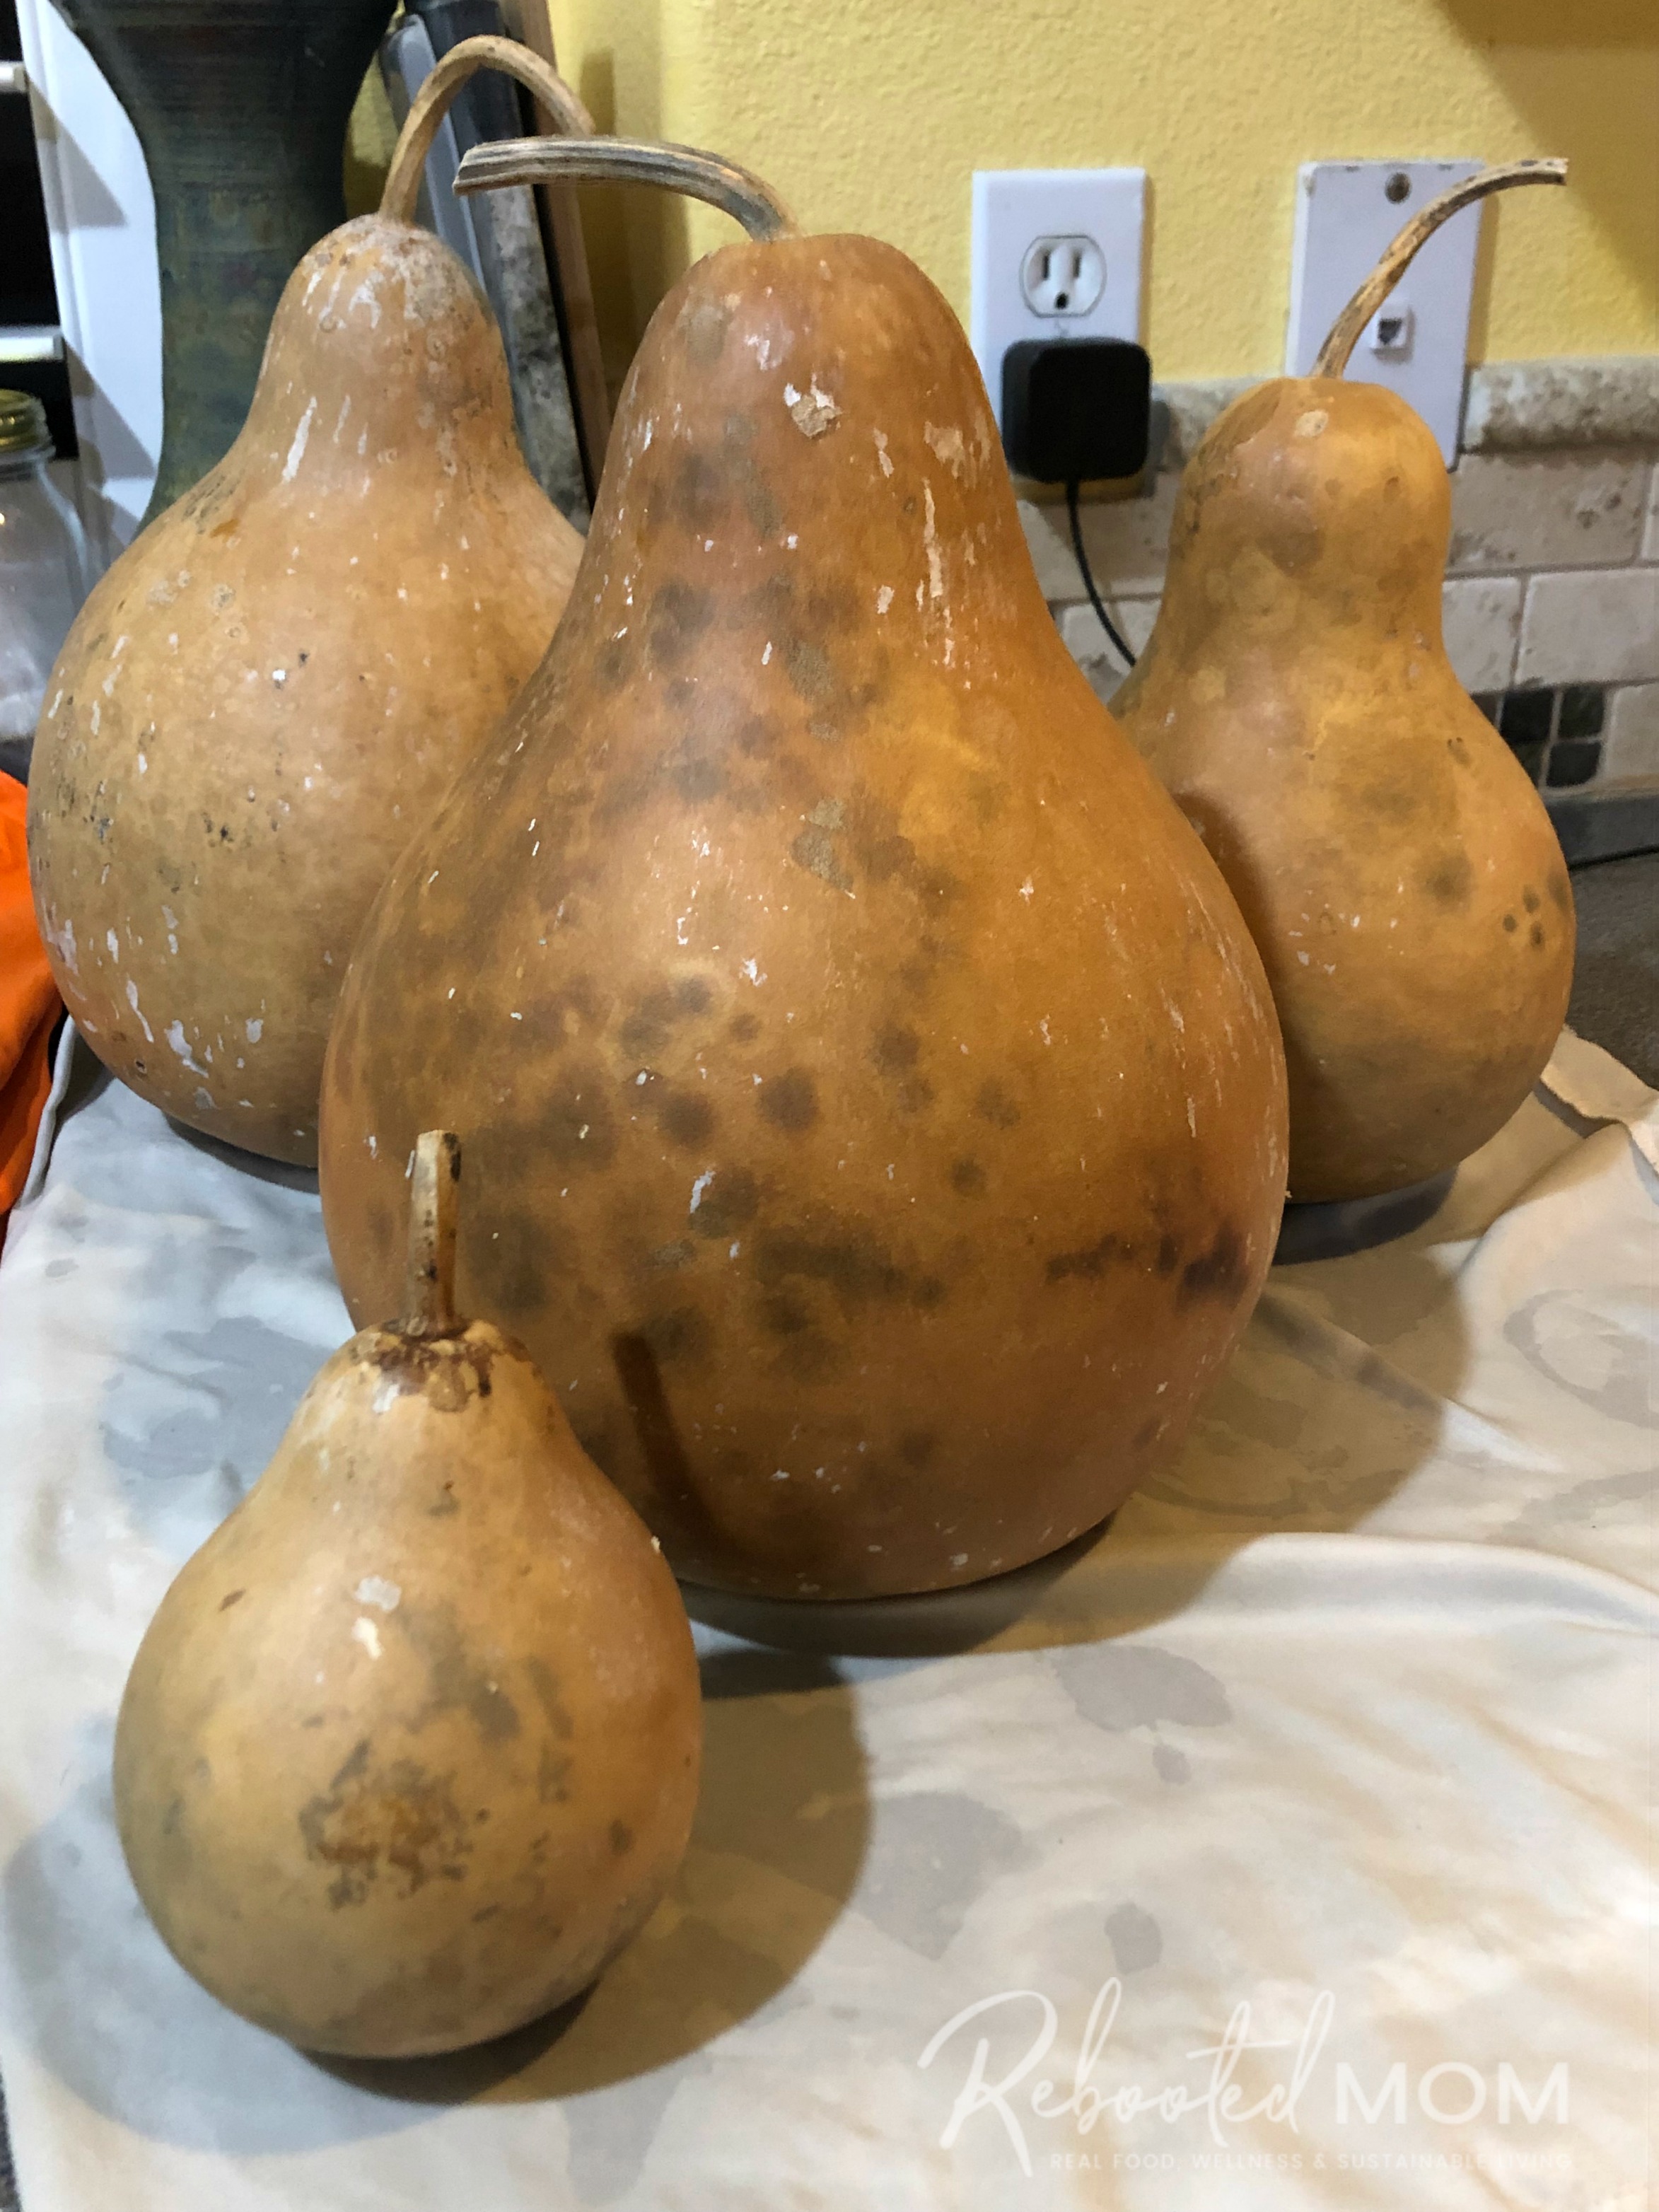 Drying and cleaning gourds for for painting or crafting projects is easy to do yourself at home if you follow a few simple steps.